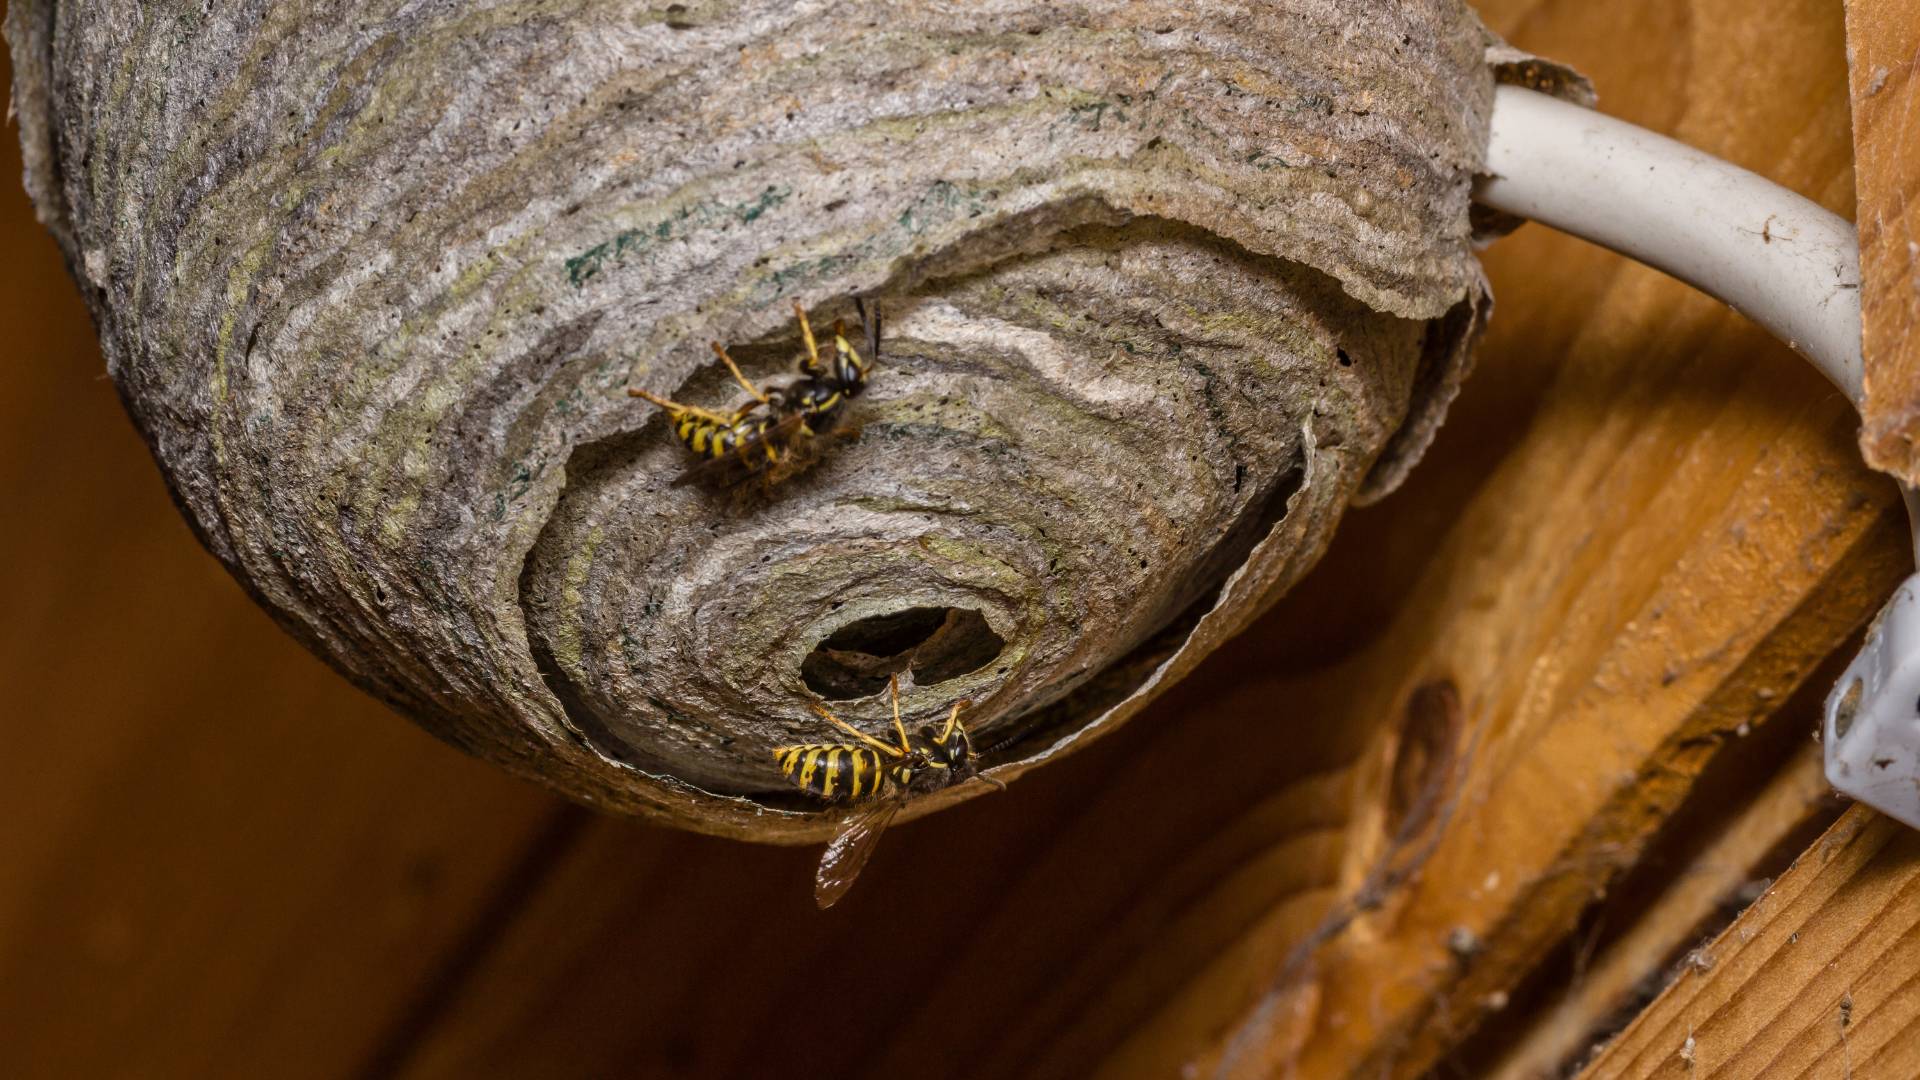 wasps and Yellow jackets on a hive inside a house